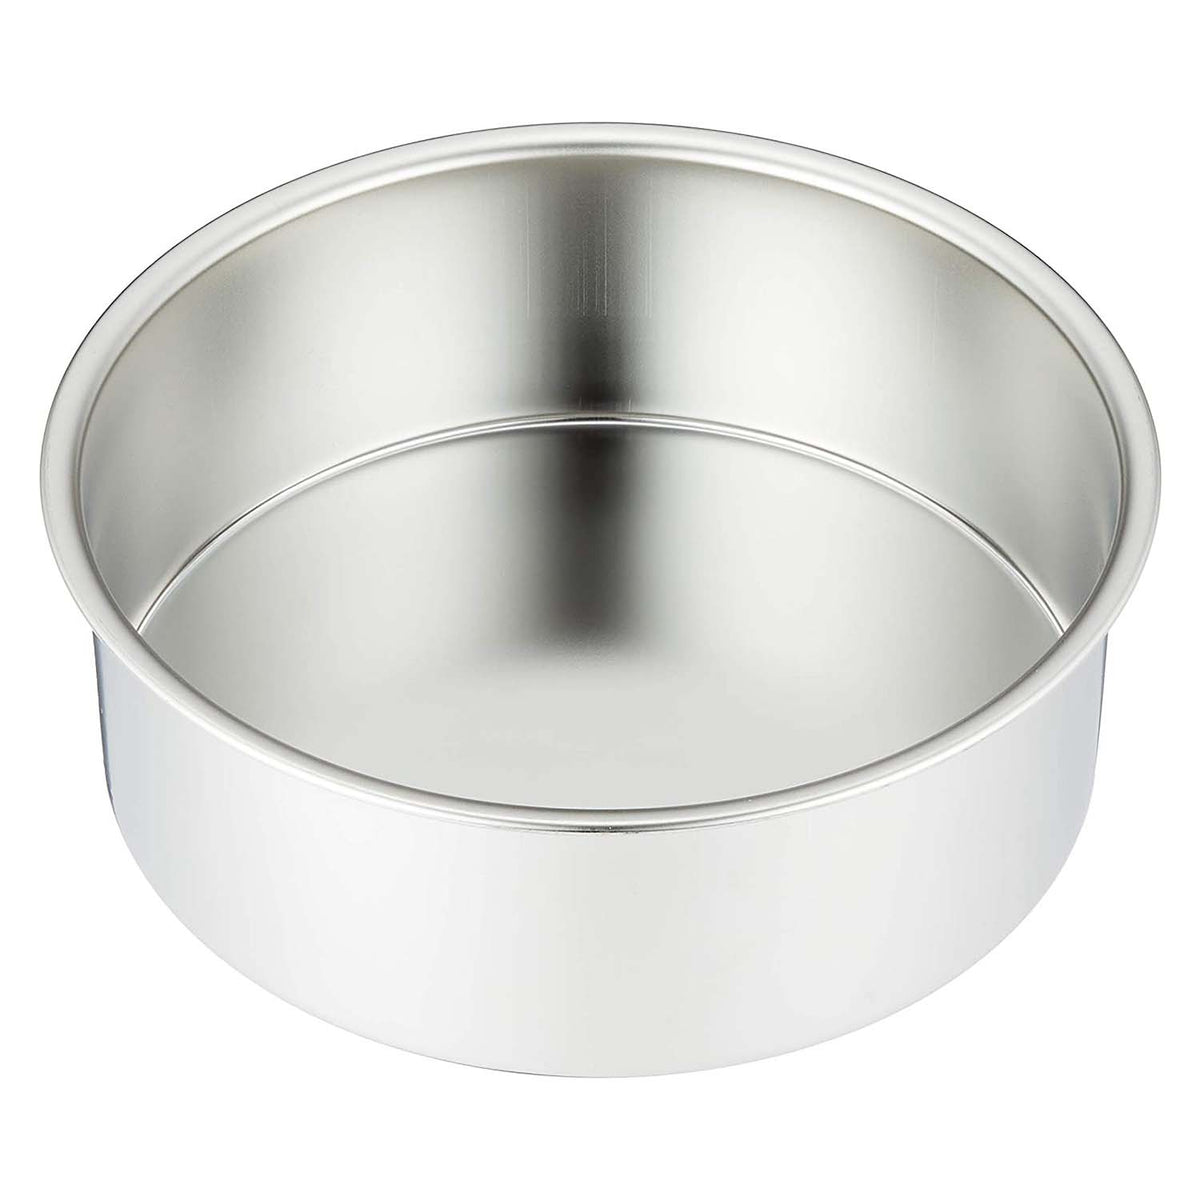 EBM Stainless Steel Shallow Round Cake Pan